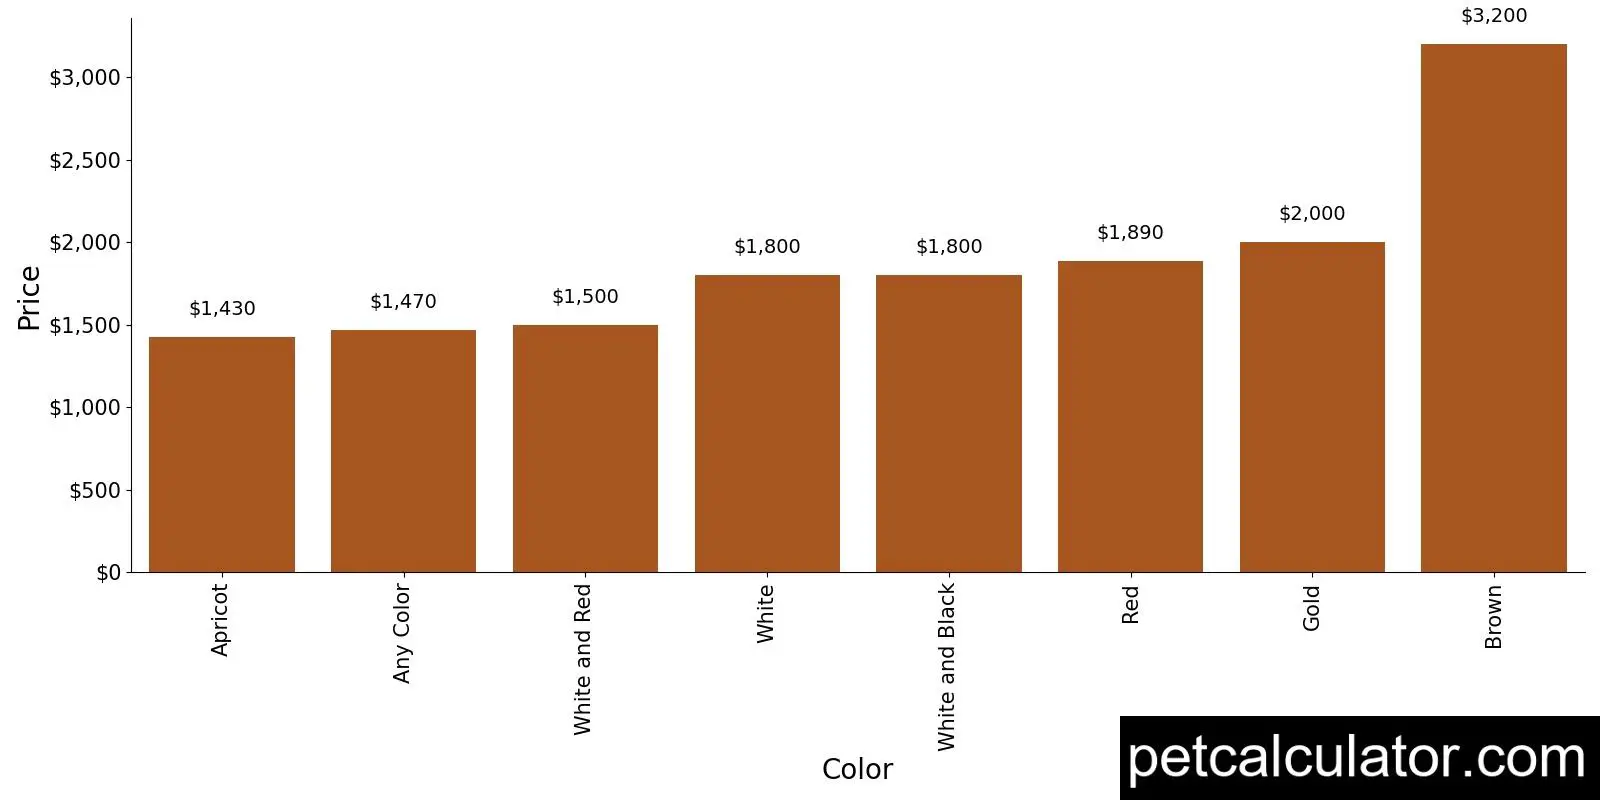 Price of Irish Setter by Color 